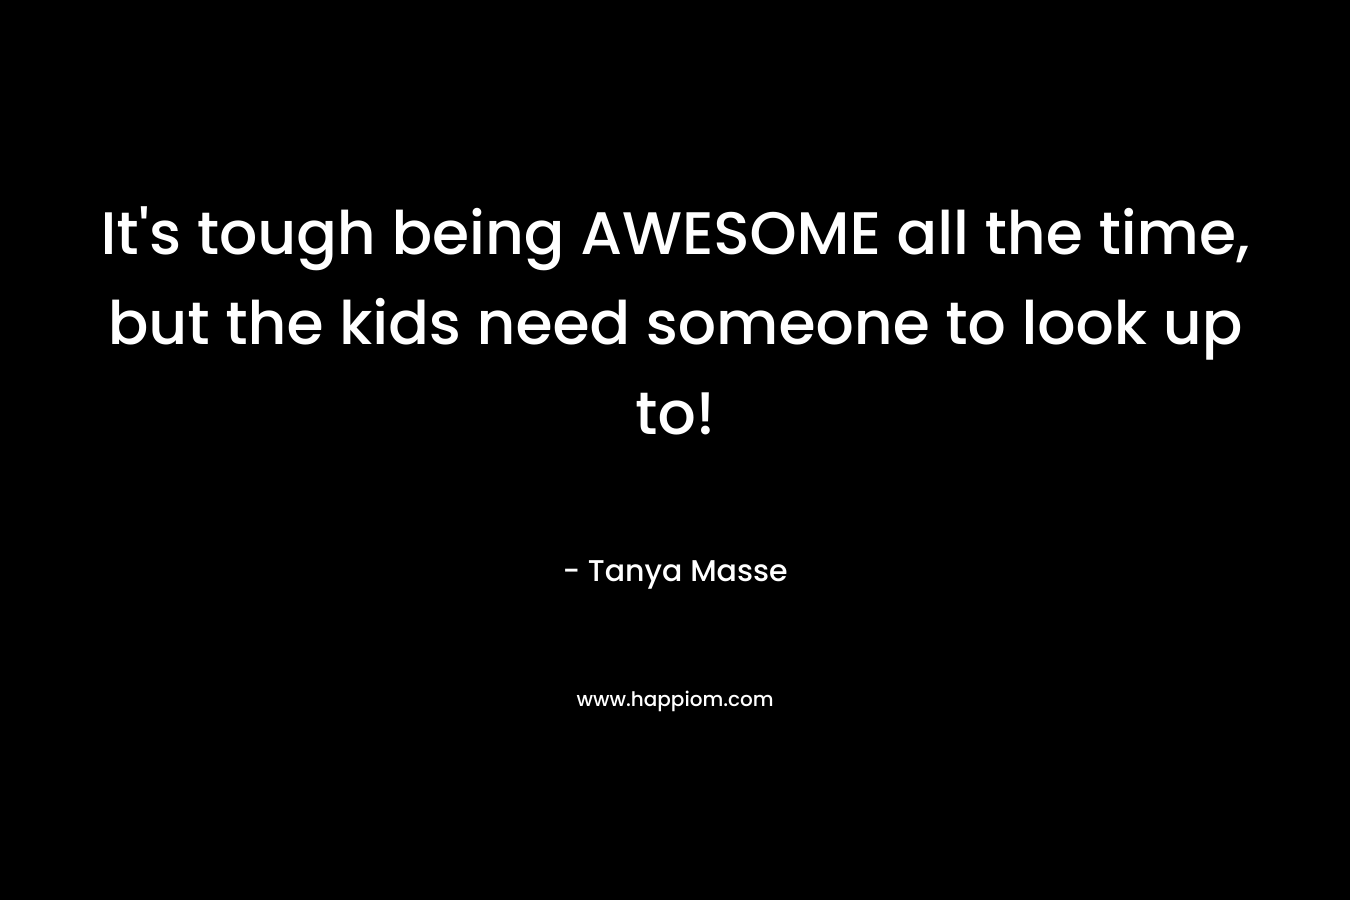 It's tough being AWESOME all the time, but the kids need someone to look up to!